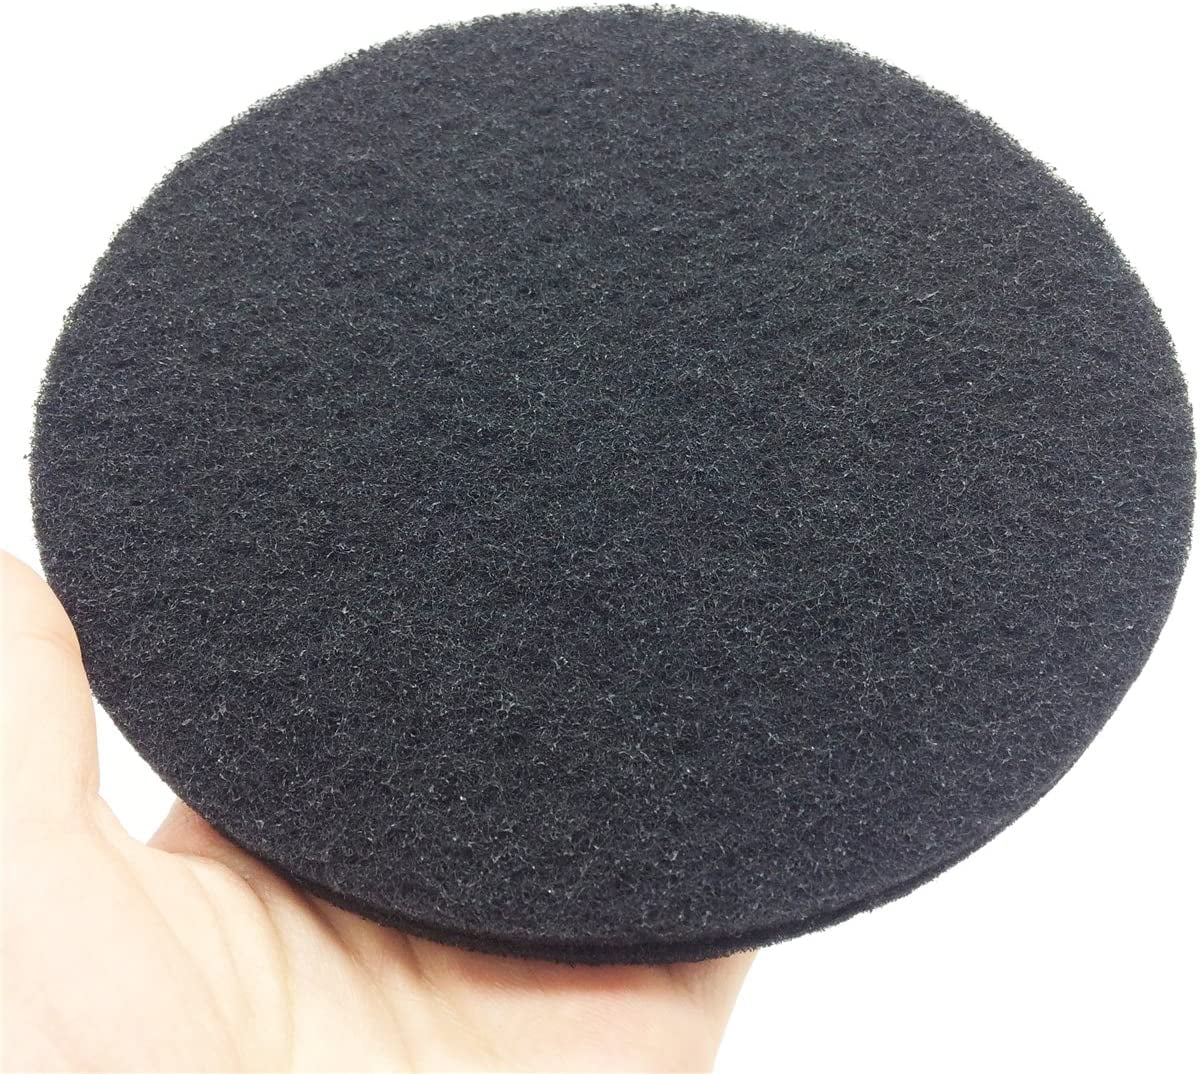 4.75 * 0.2 in 8 Pcs, Black Kettion 7.25 Inch Filters for Kitchen Compost Bin Charcoal Filter Replacement Activated Carbon 8 Squares 5 mm Thick Fits Bucket Compost Garden Pail Countertop Bins 